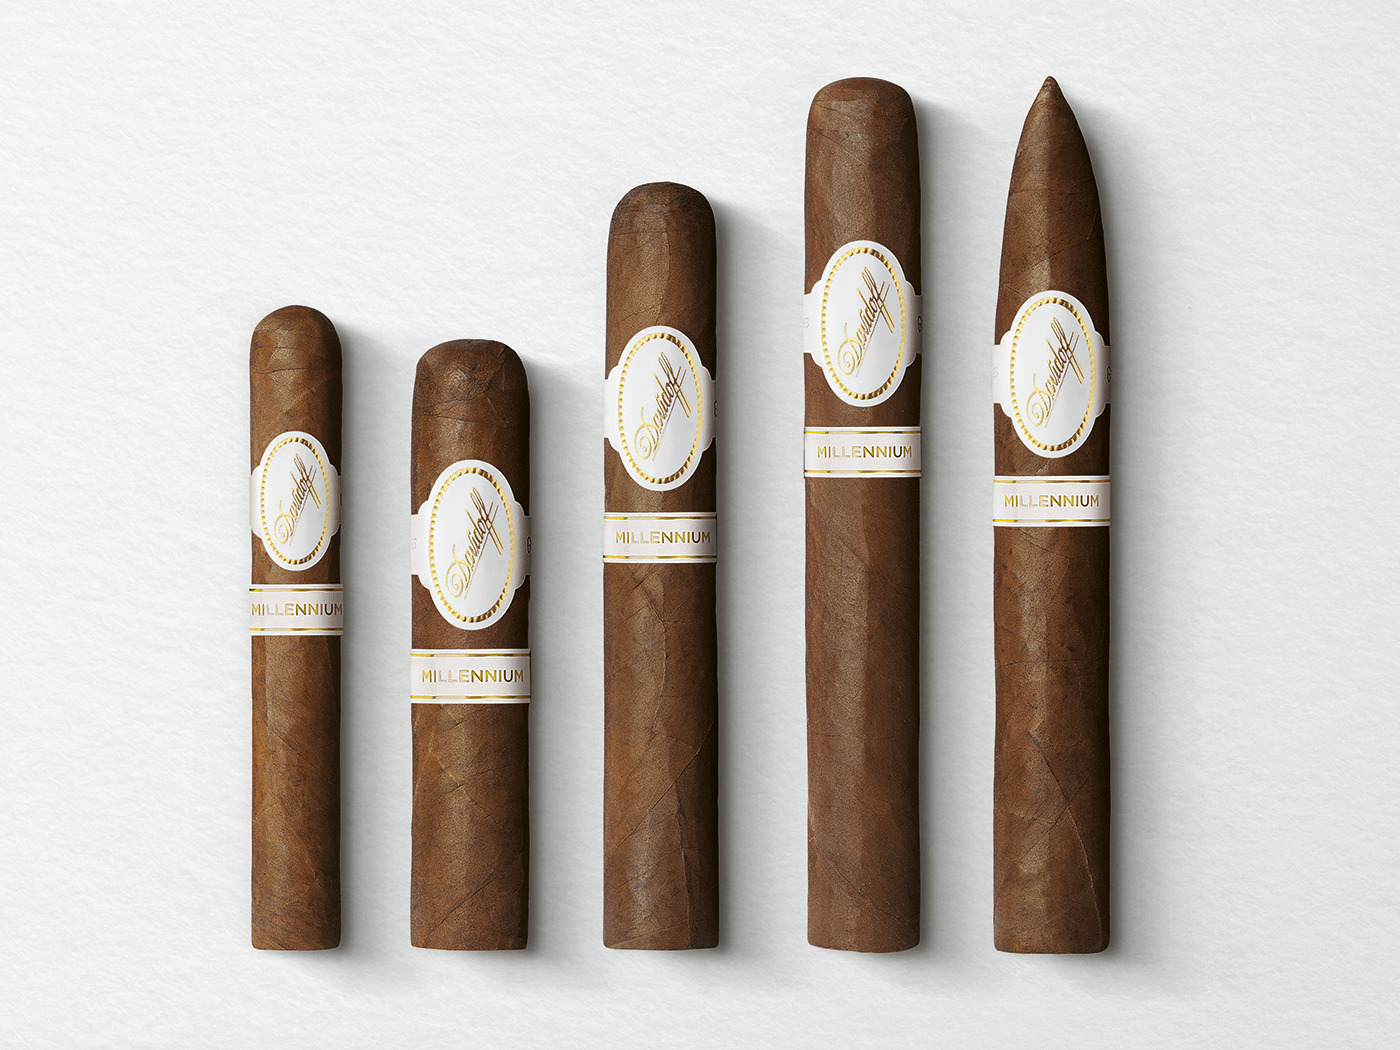 The 5 different formats of the Davidoff Millennium line shown next to one another.